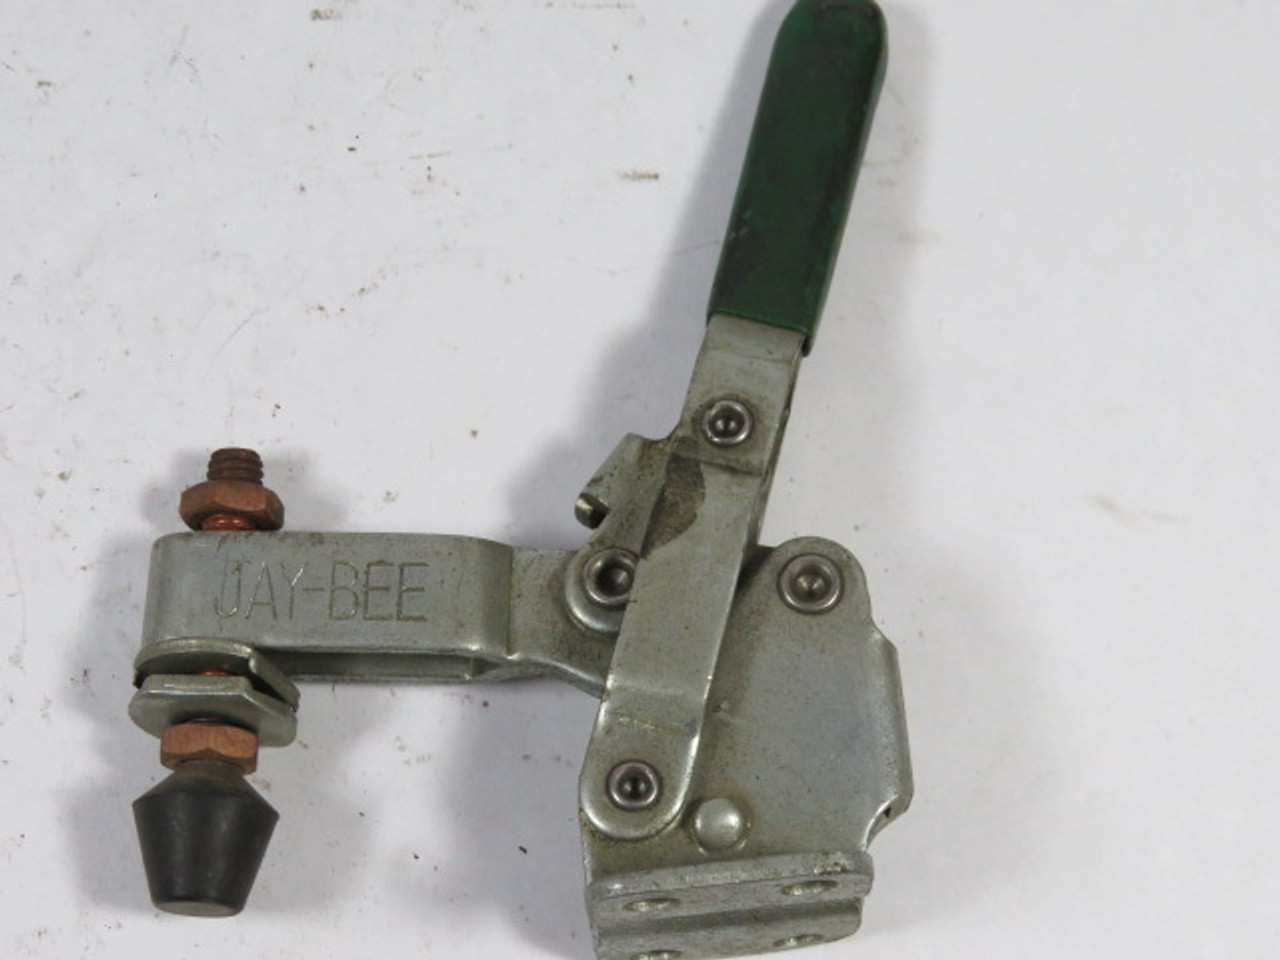 Jay-Bee HV450 Vertical Flange Base Toggle Clamp USED